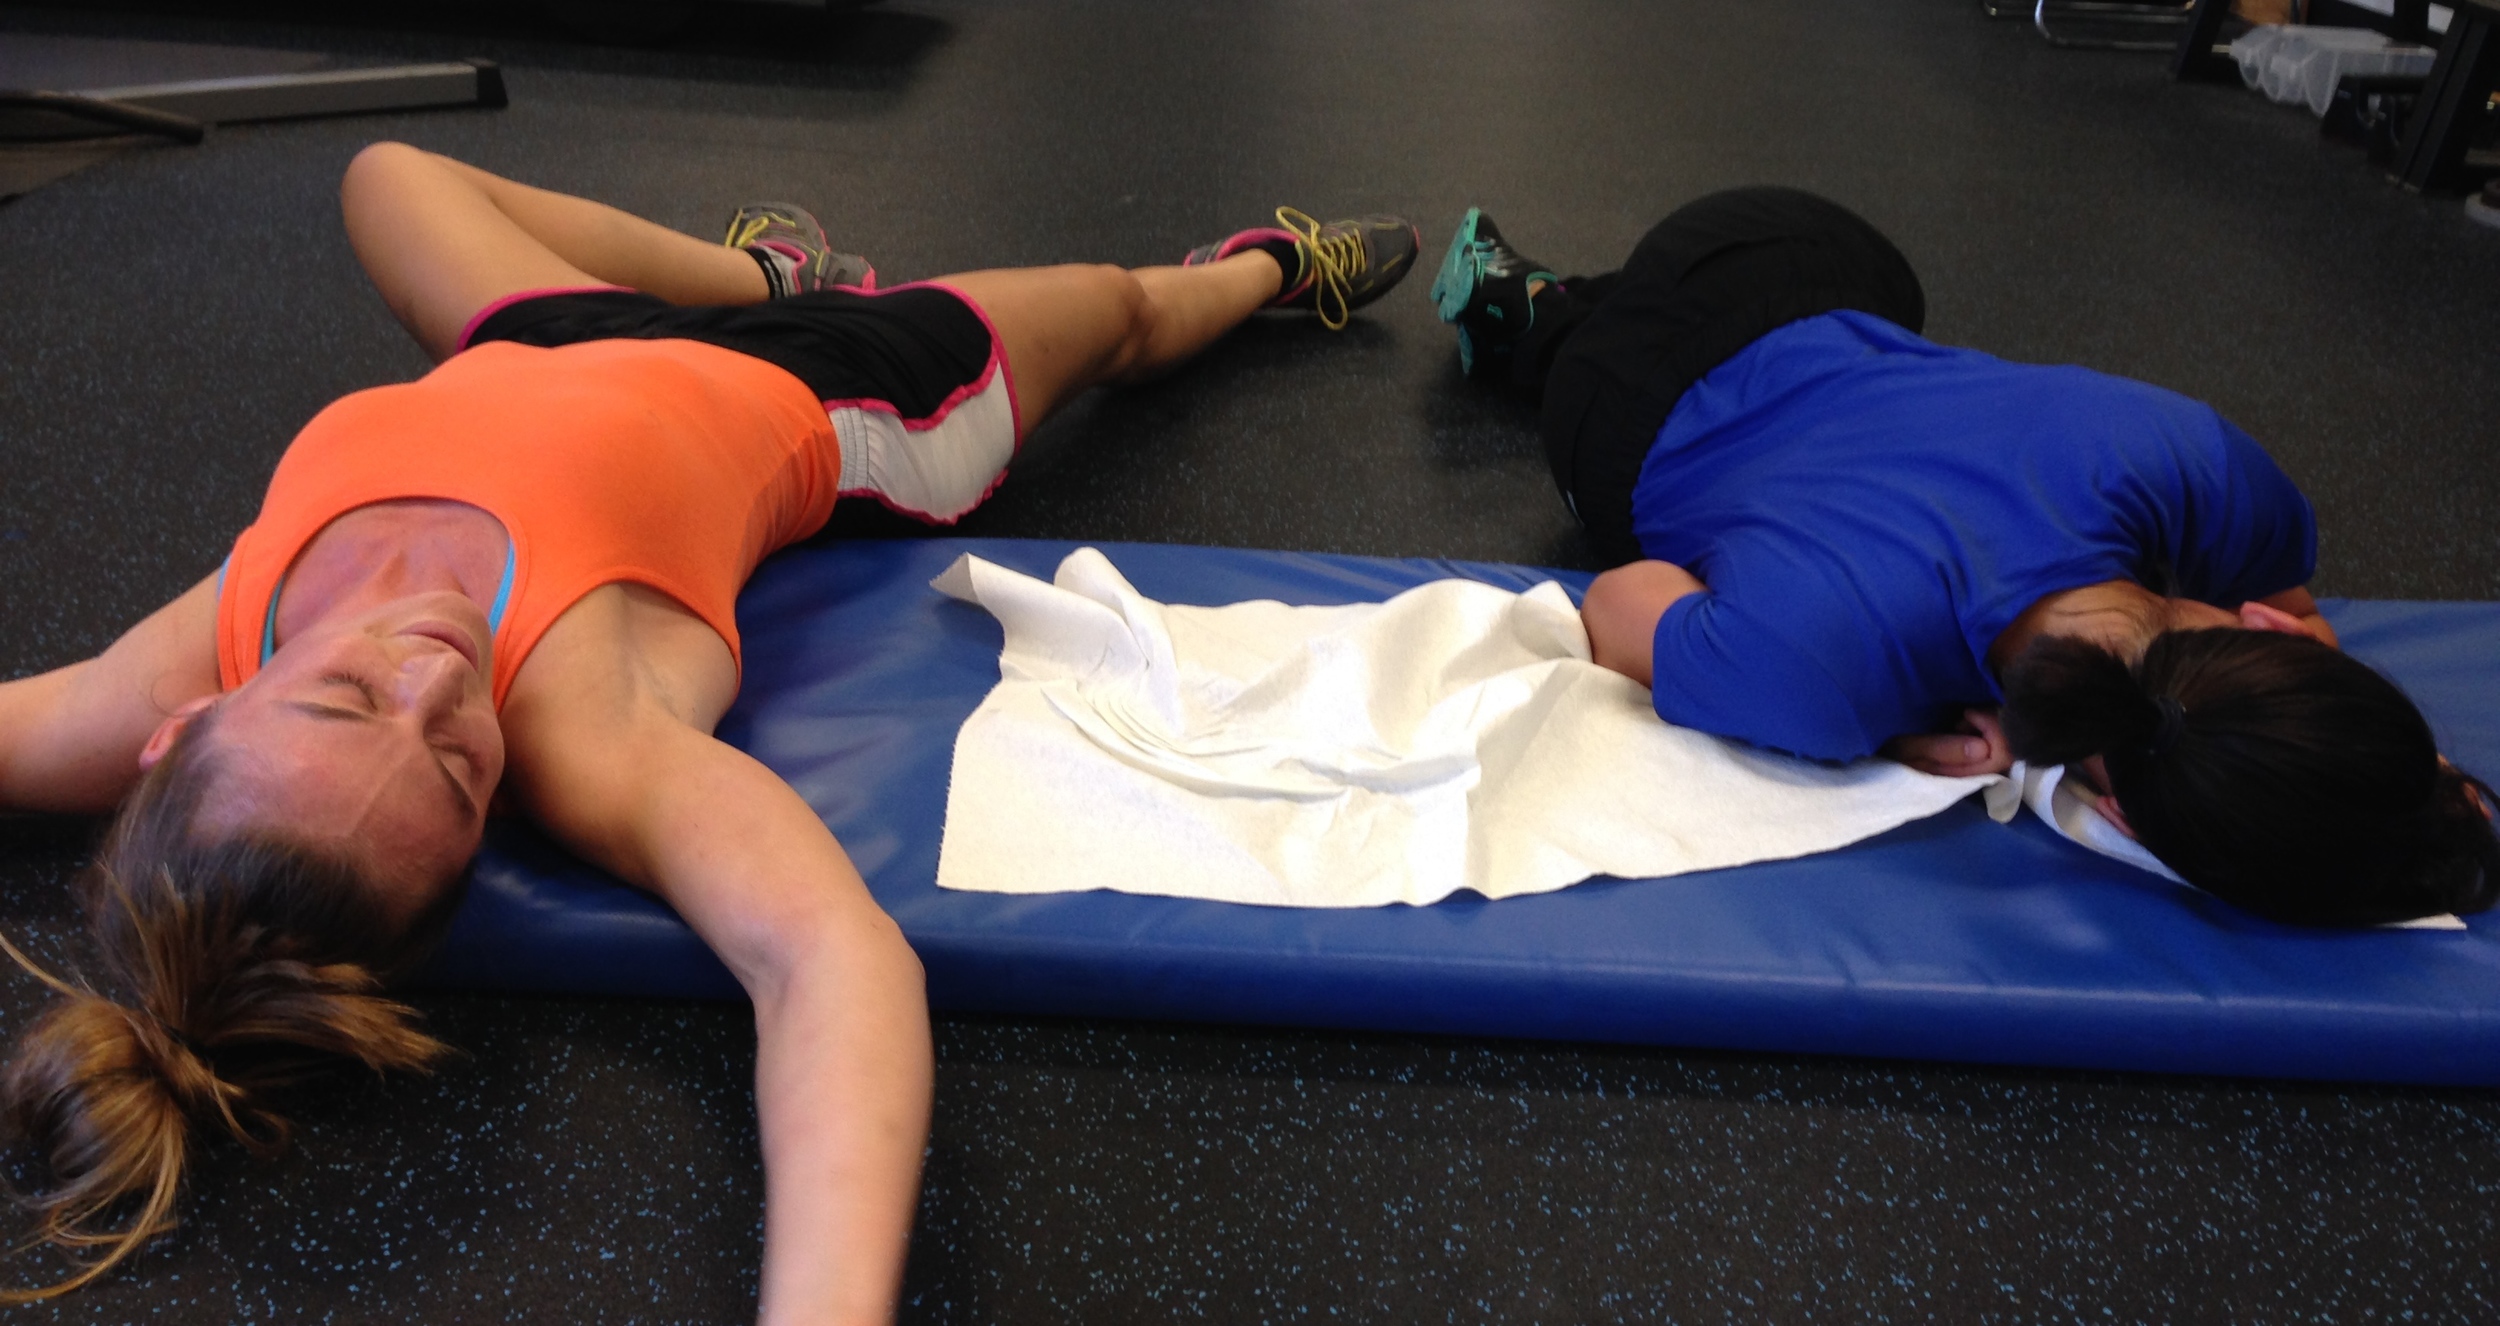 Here are two of my clients post workout. &nbsp;These chicks work hard! They&nbsp;do 6:00 minute planks "for fun" after their workout. &nbsp;Next on the to do list: eat and rest!